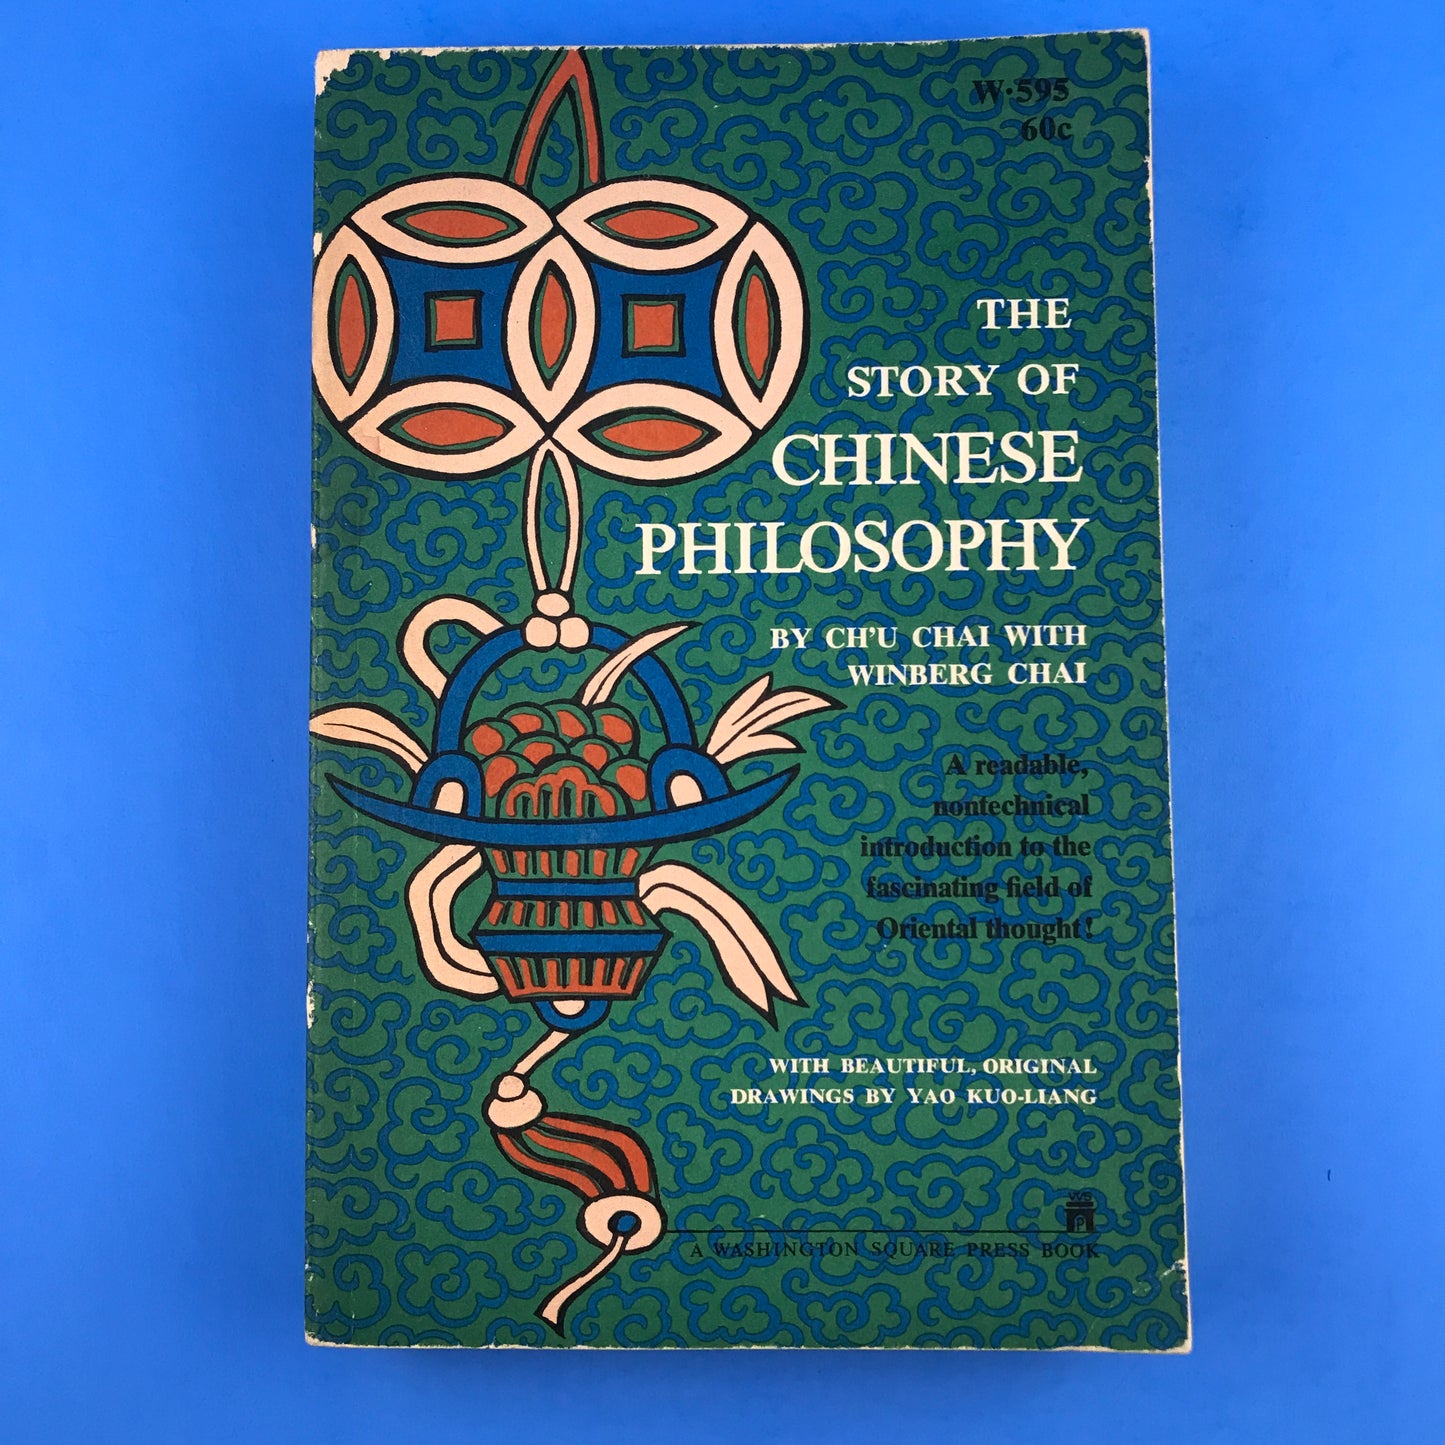 The Story of Chinese Philosophy